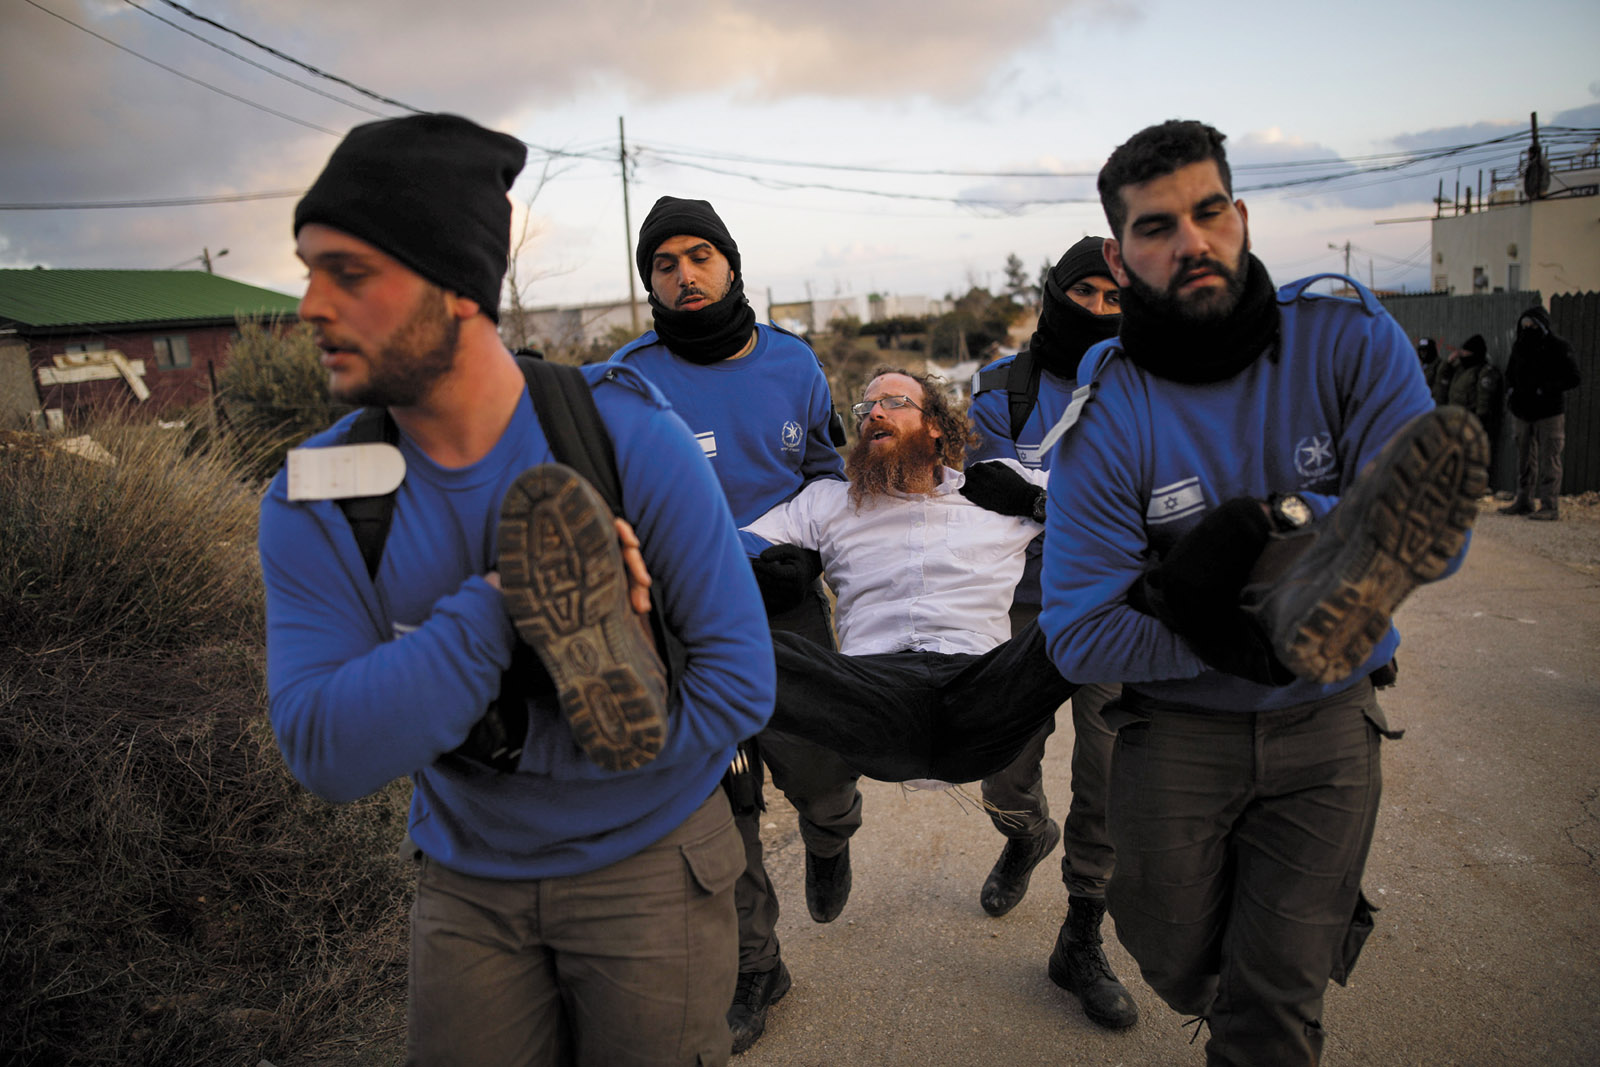 Israeli policemen removing a protester during the eviction of Jewish settlers from the illegal settlement of Amona in the occupied West Bank, February 2017